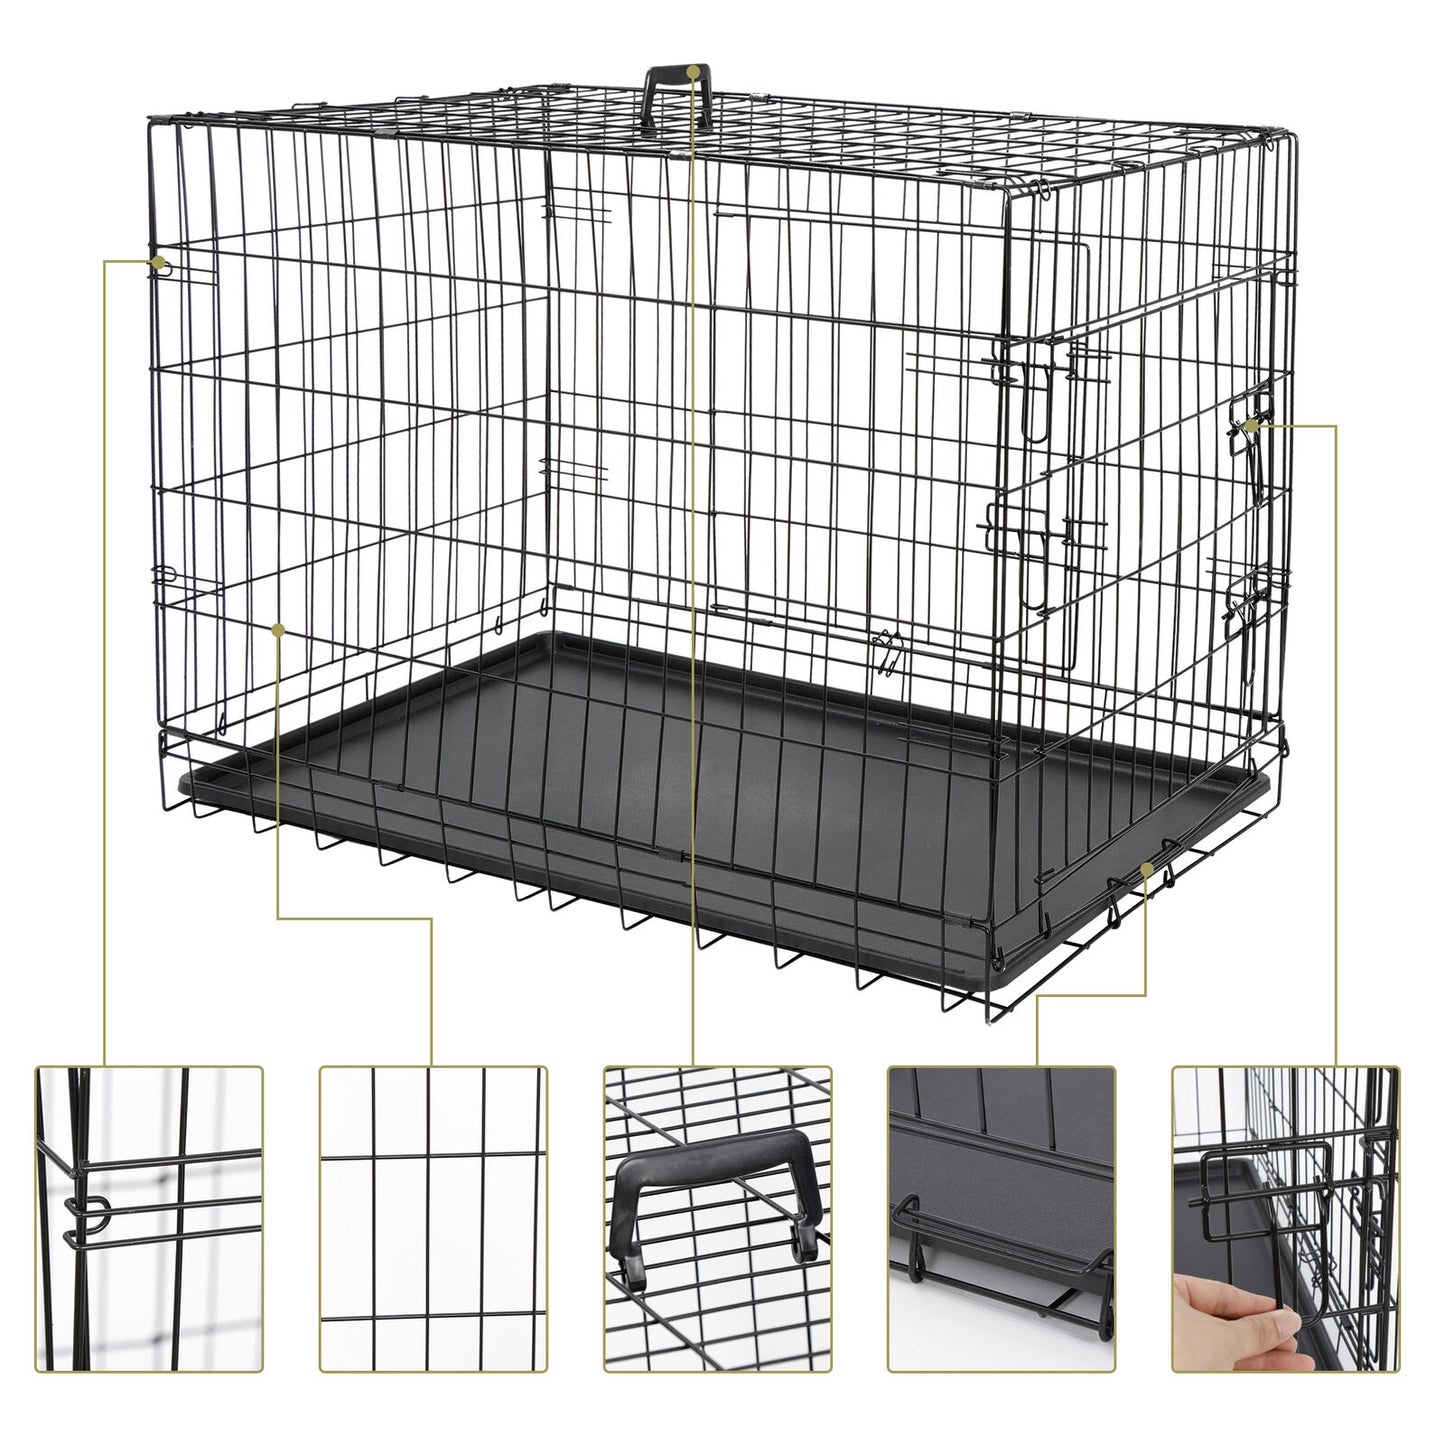 36" Dog Crate Kennel Folding Metal Pet Cage 2 Door With Tray Pan Black